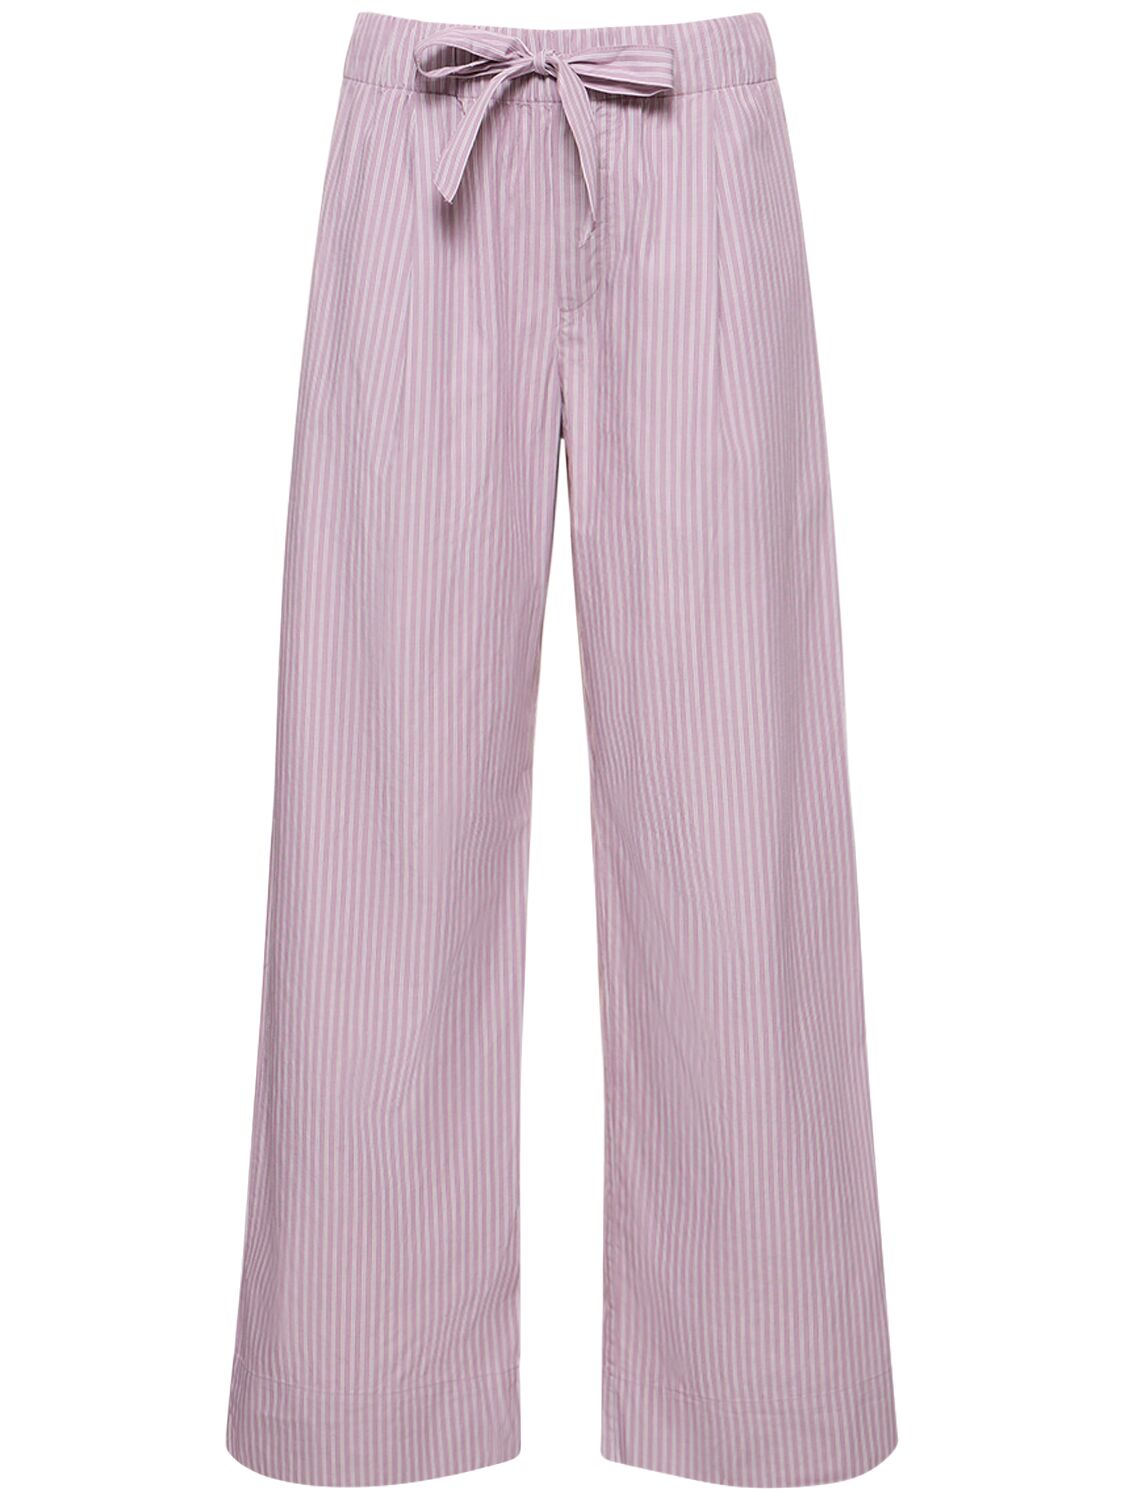 Image of Pleated Cotton Pants